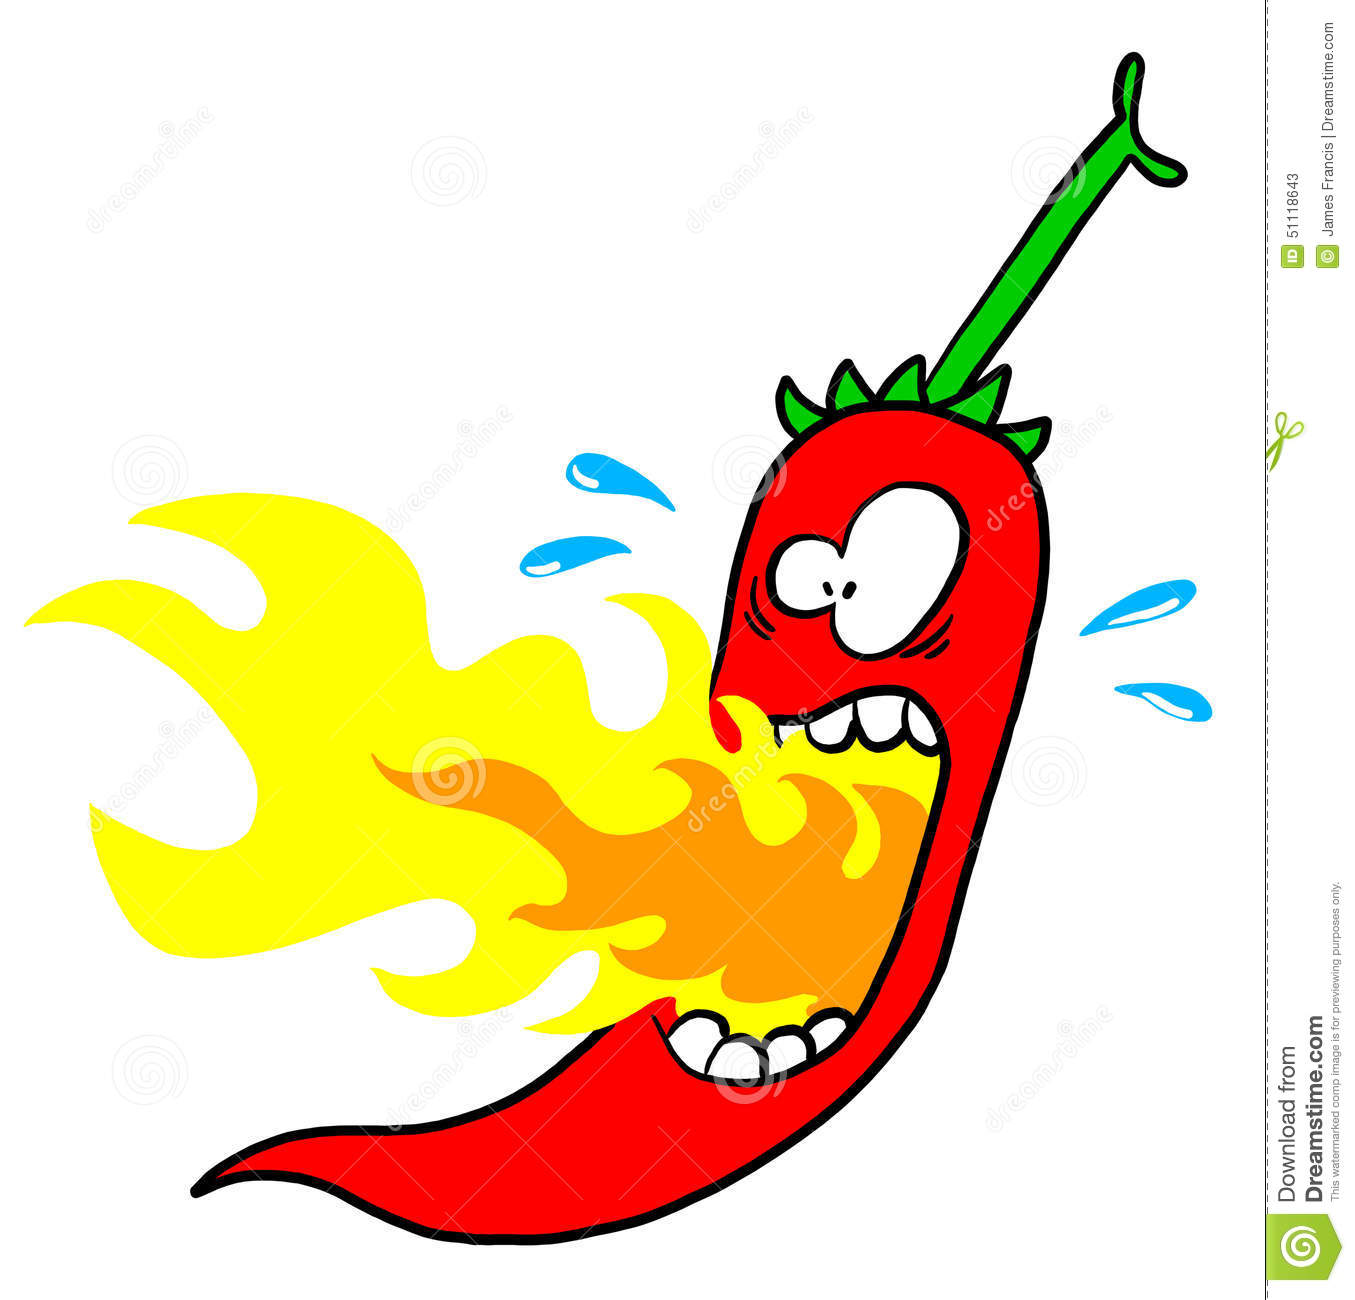 Chili With Mouth On Fire Stock Illustration   Image  51118643